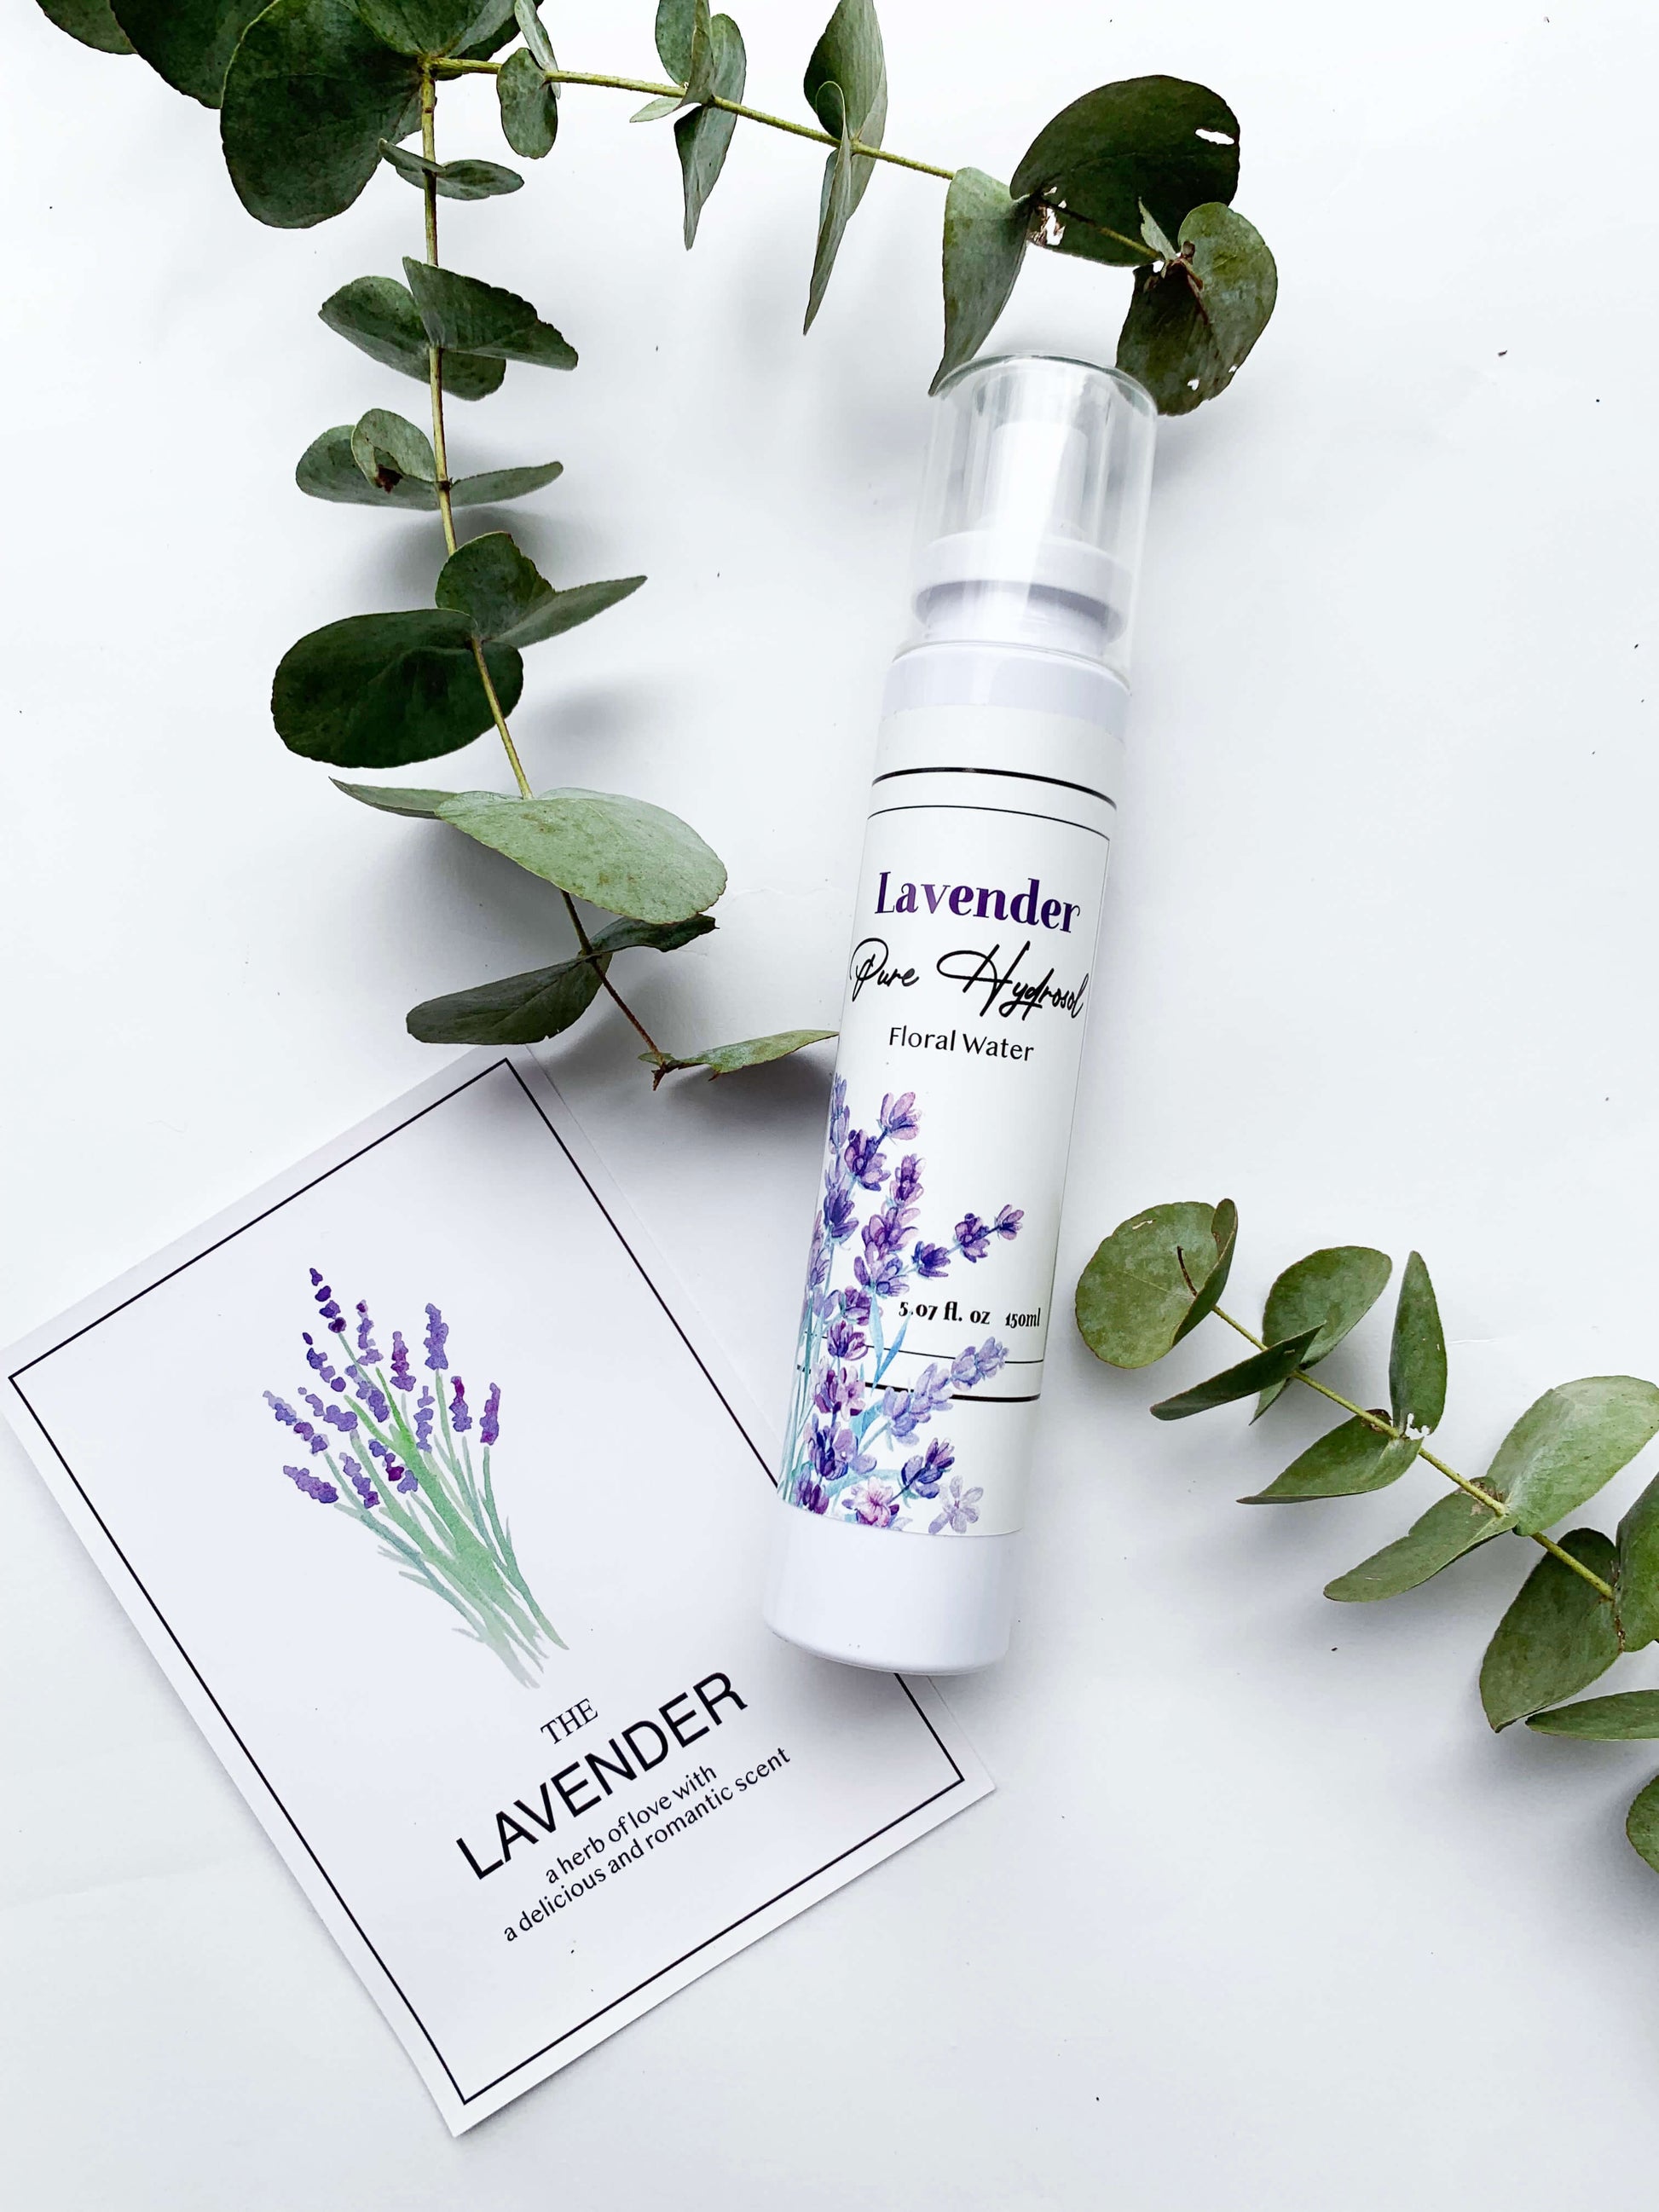 Lavender Hydrosol Floral Water/flower water as face toner from NZ Lavender Herb Farm